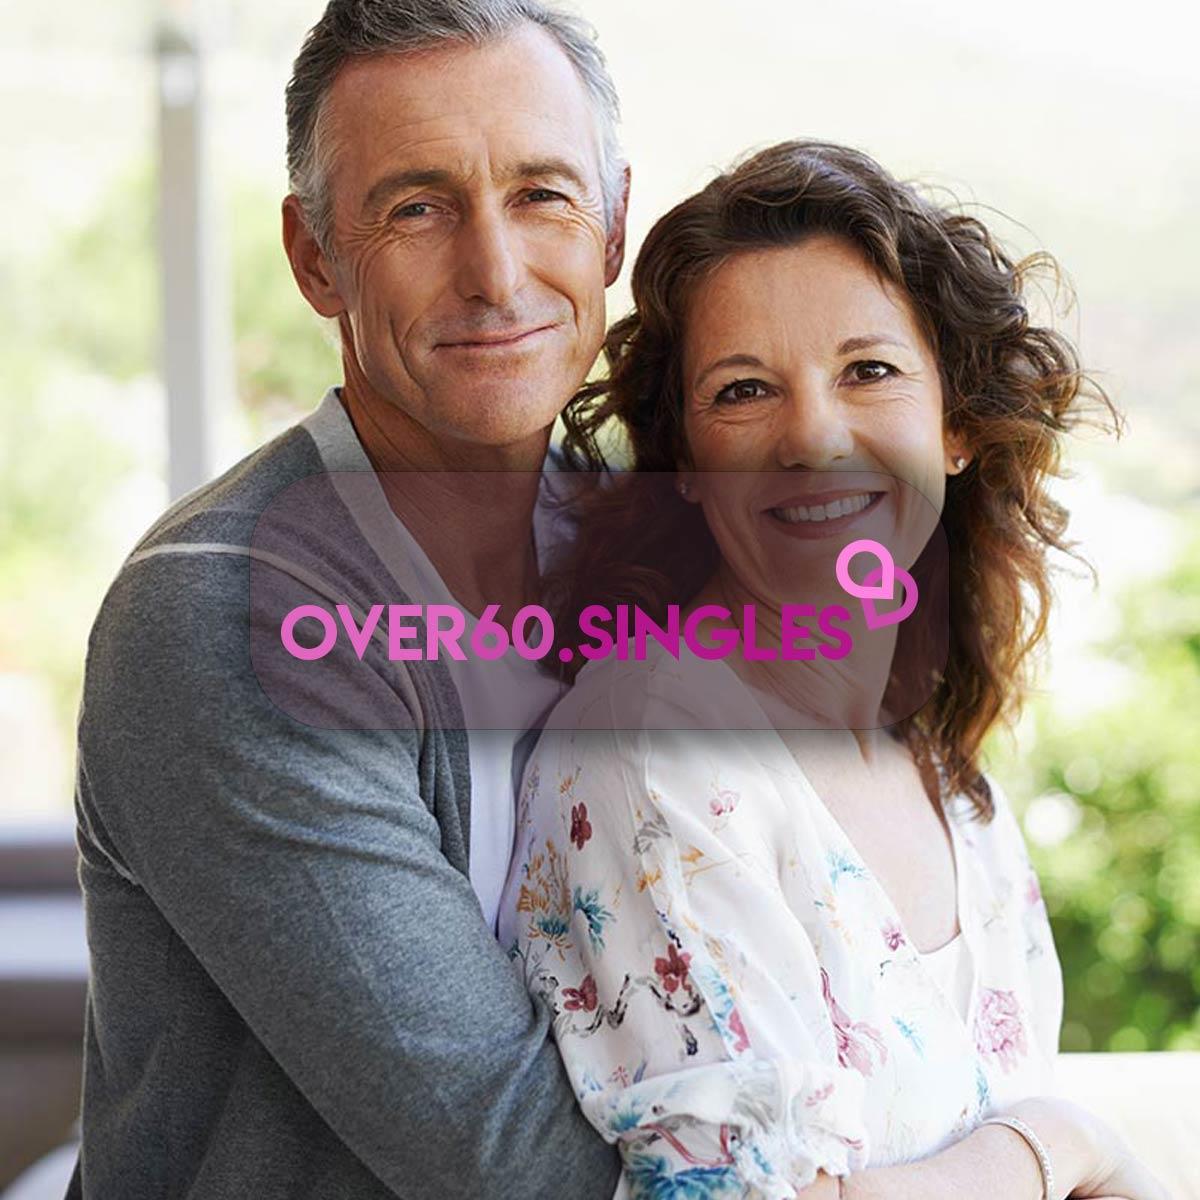 Over 60 Singles: Connect with Love and Connection